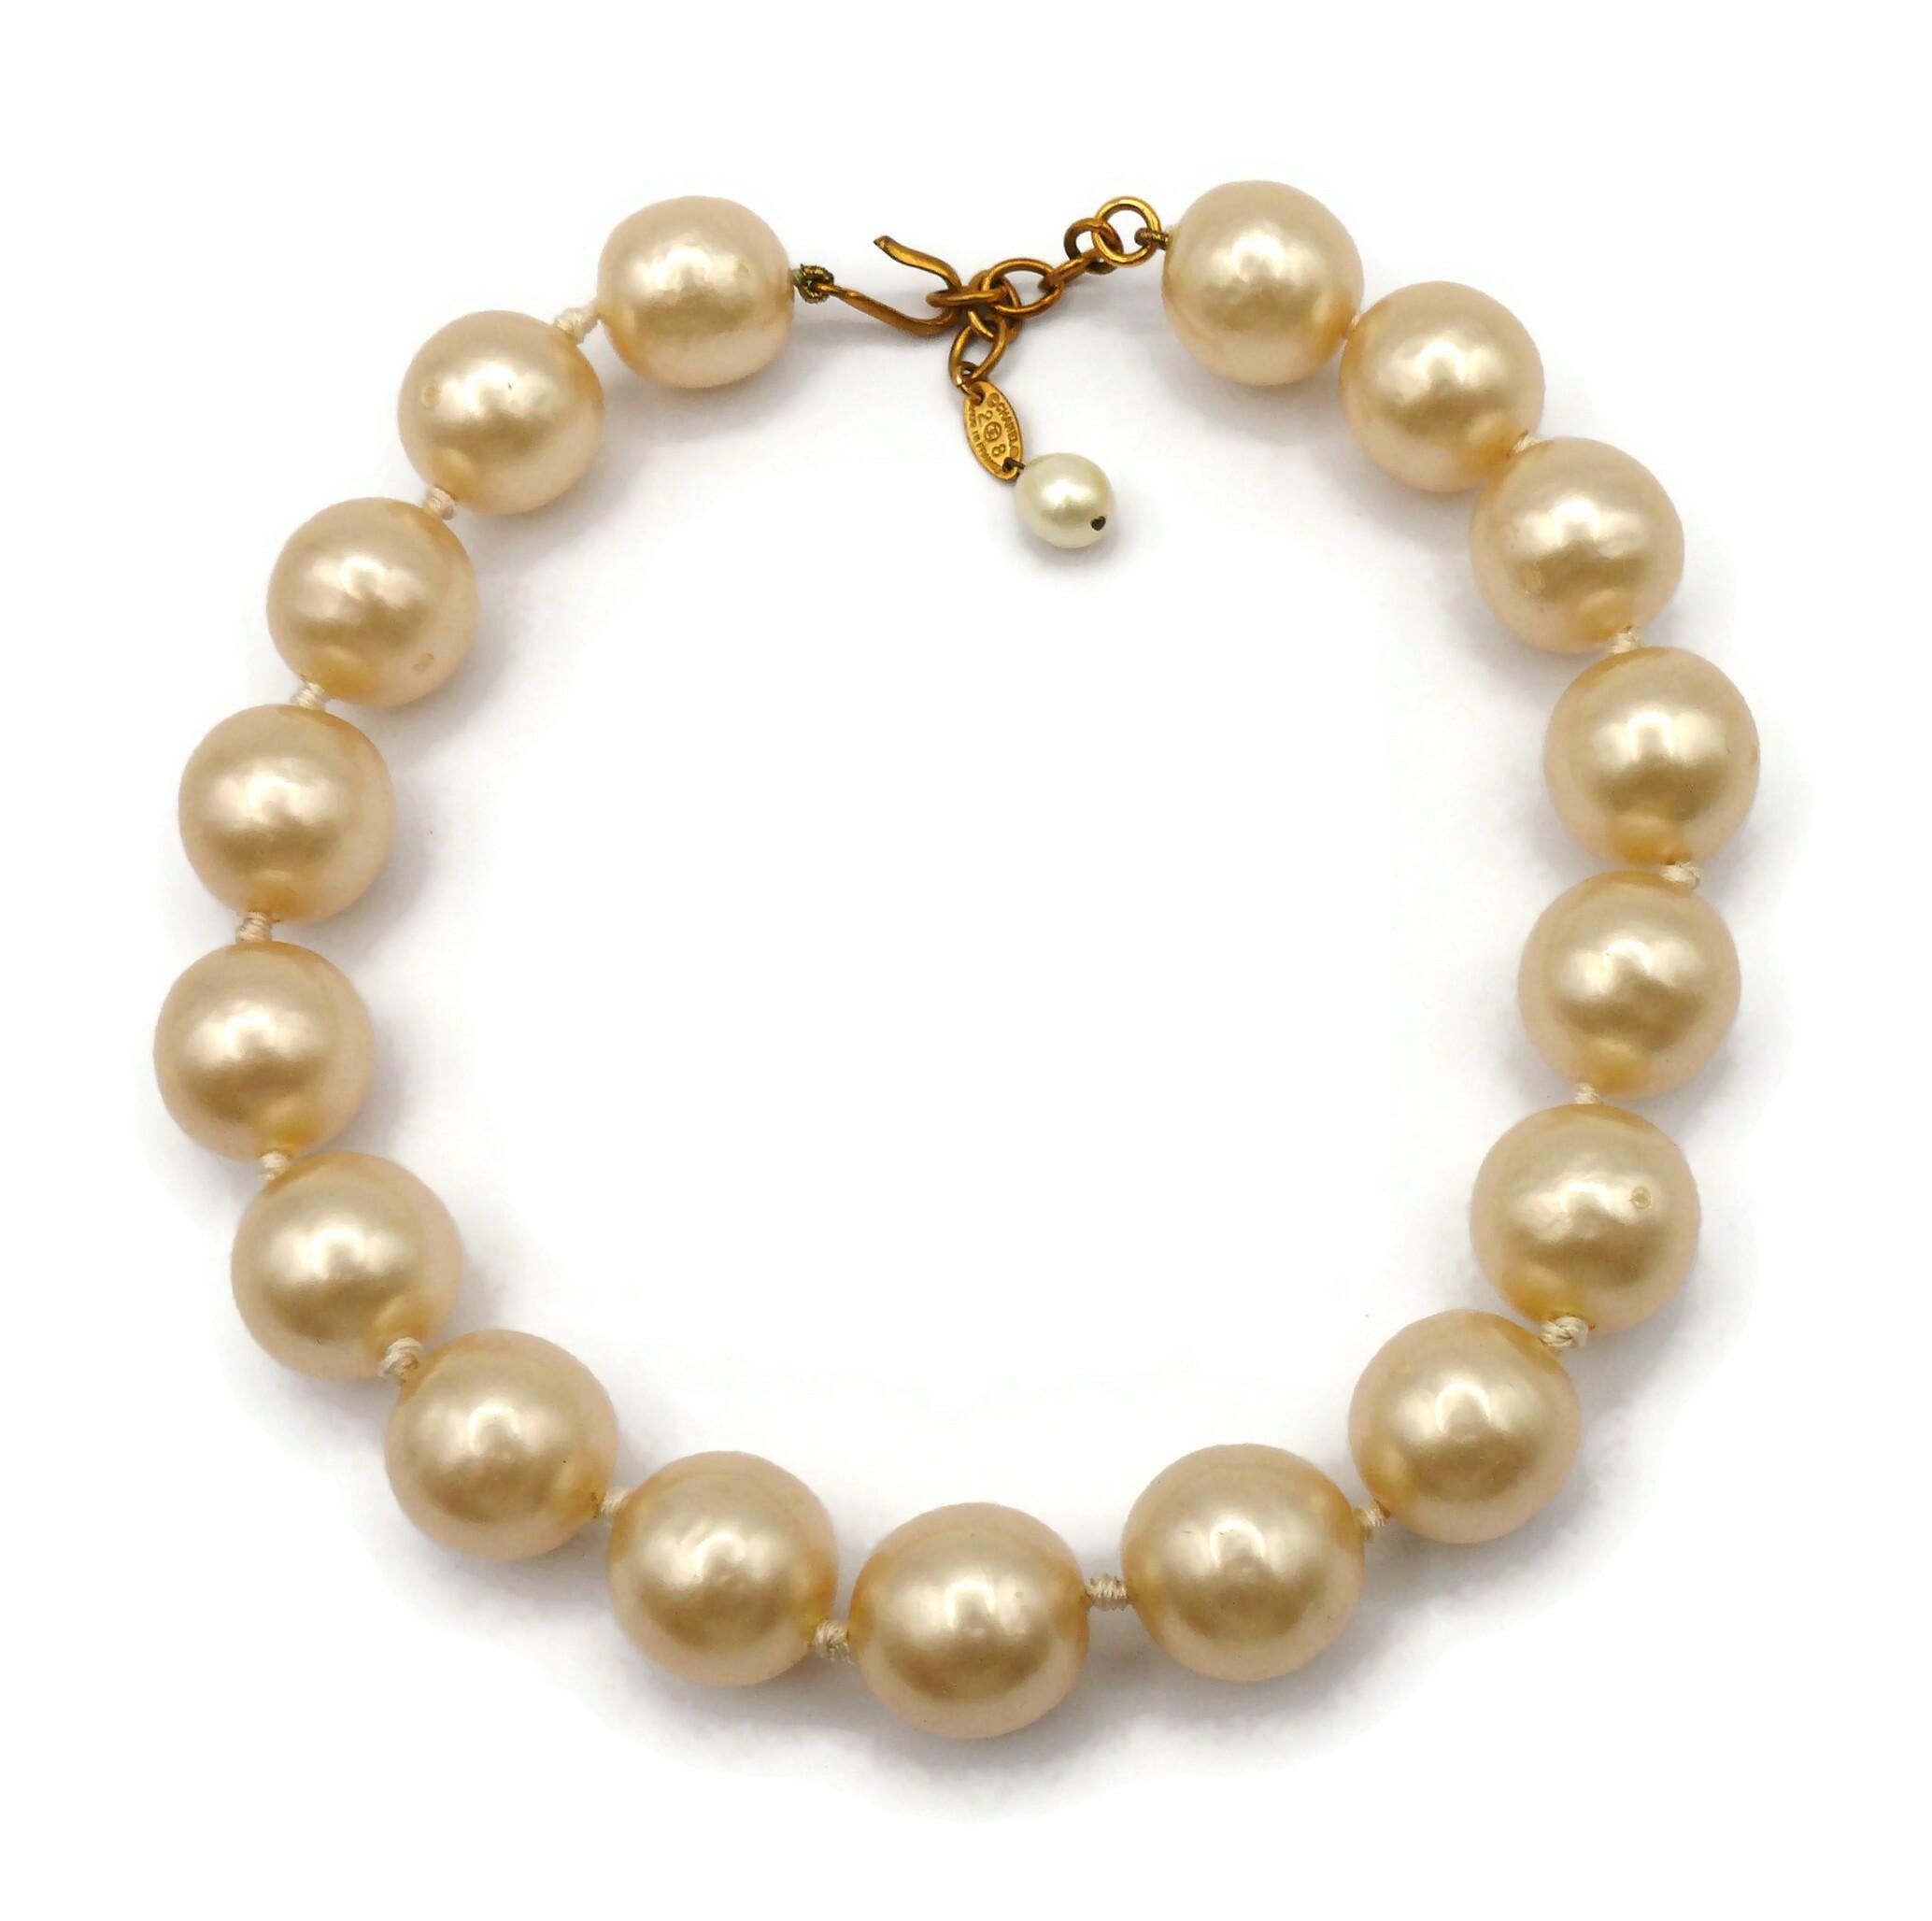 CHANEL by KARL LAGERFELD Vintage Large Faux Pearl Necklace, 1993 In Good Condition For Sale In Nice, FR